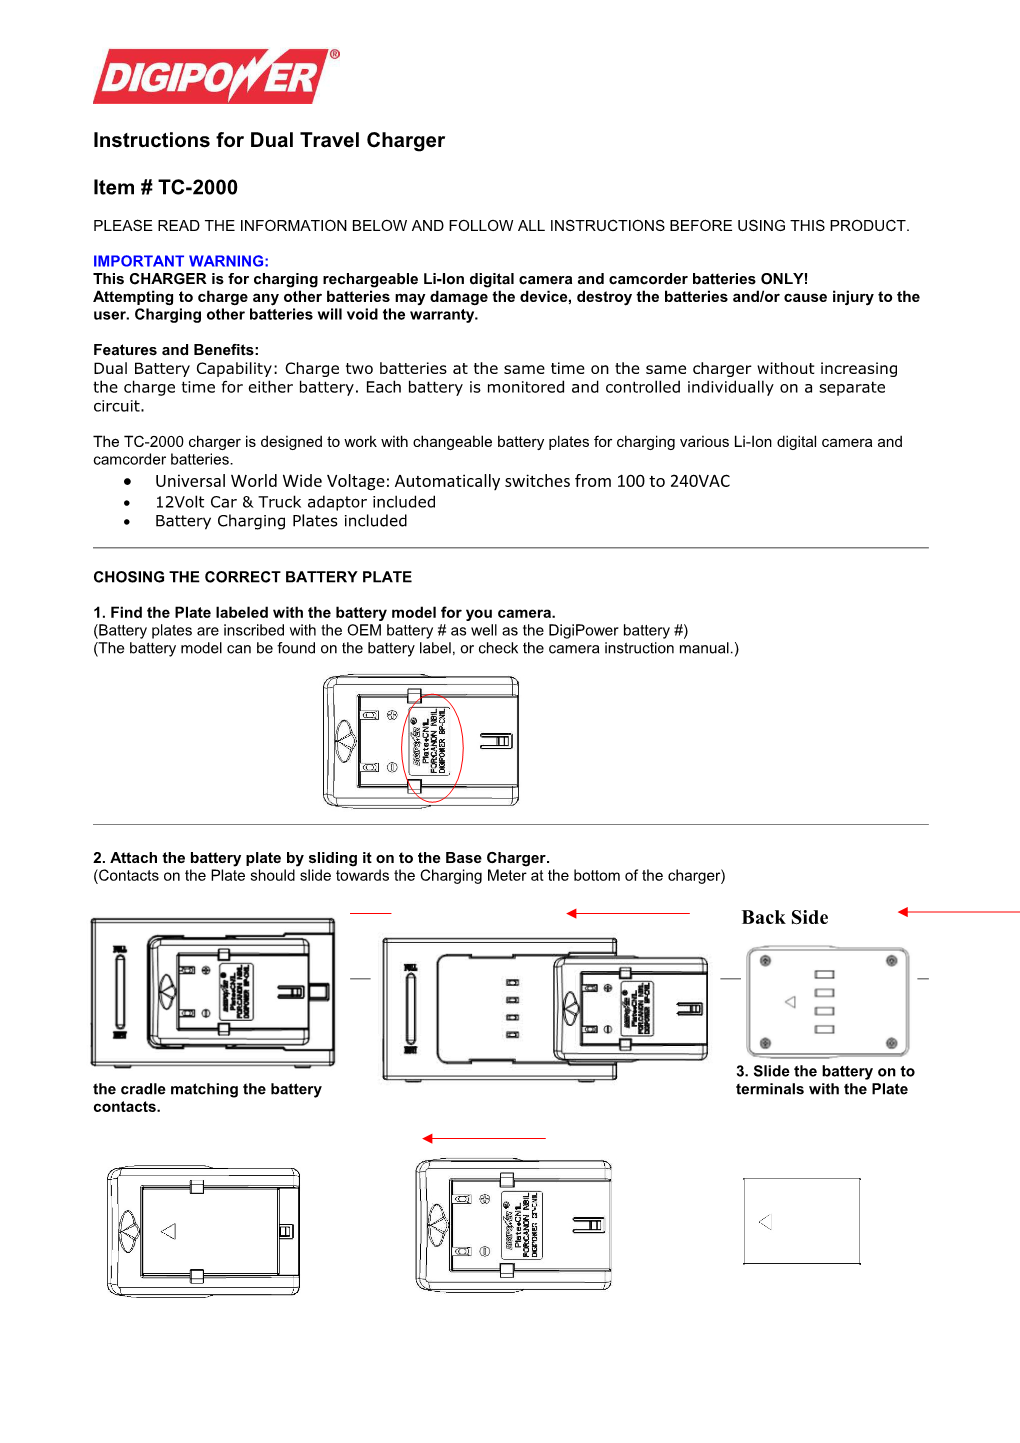 Operating Instructions for Travel Charger Item # TC-1000/RTC-1000/VTC-1000